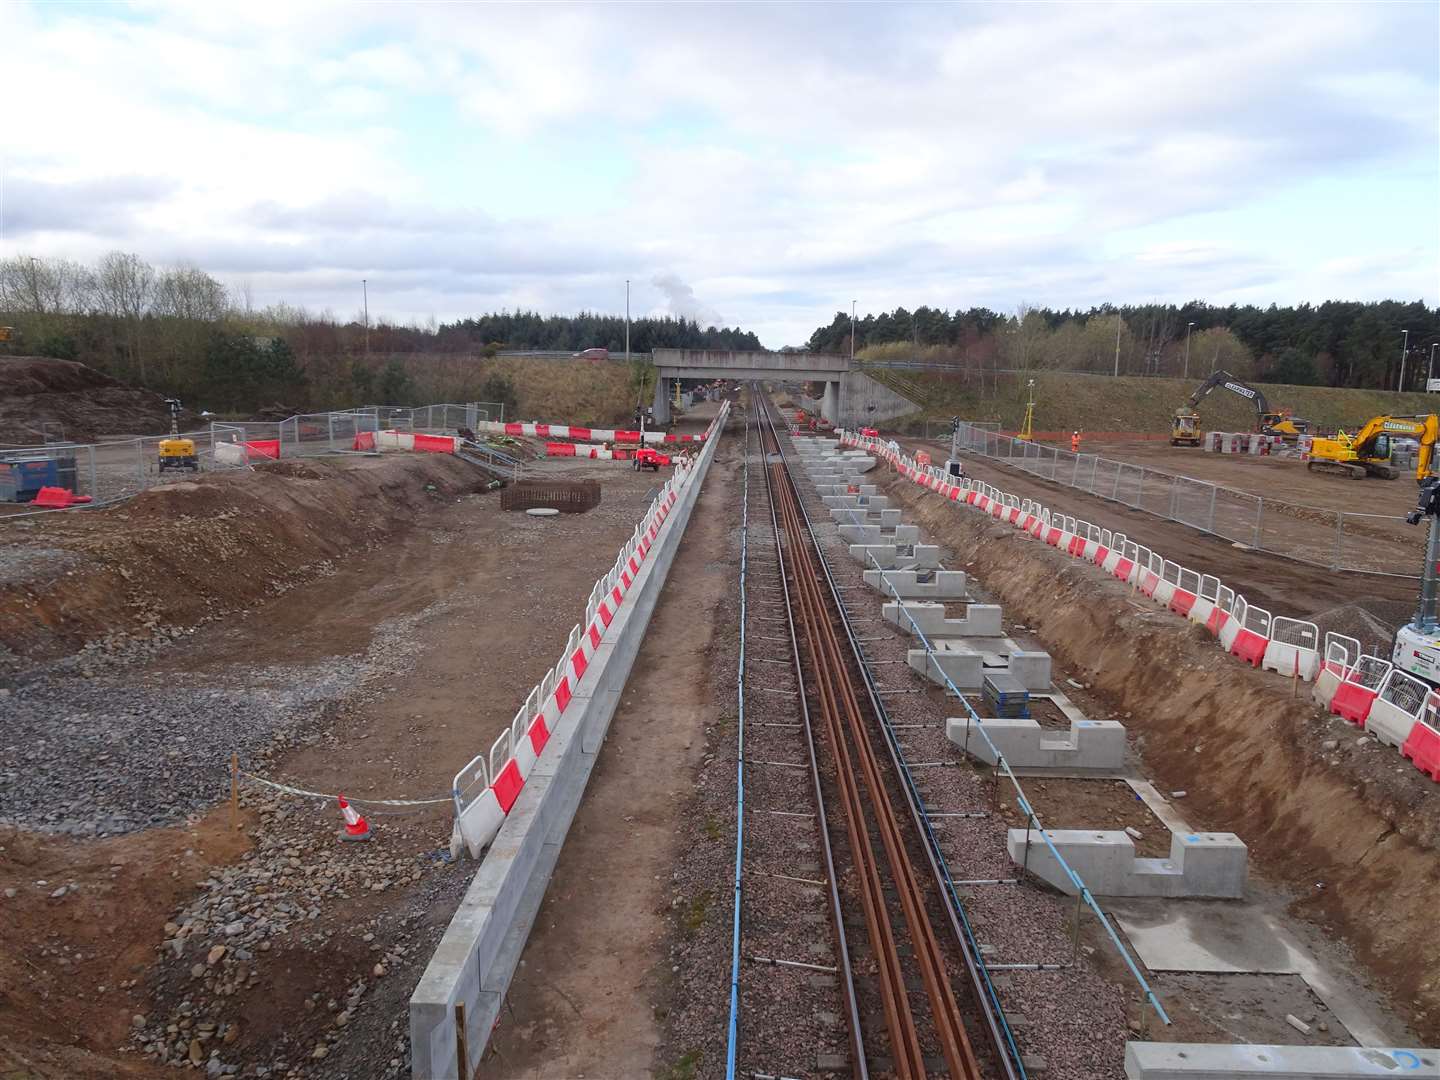 Works on Inverness Airport station is progressing well.